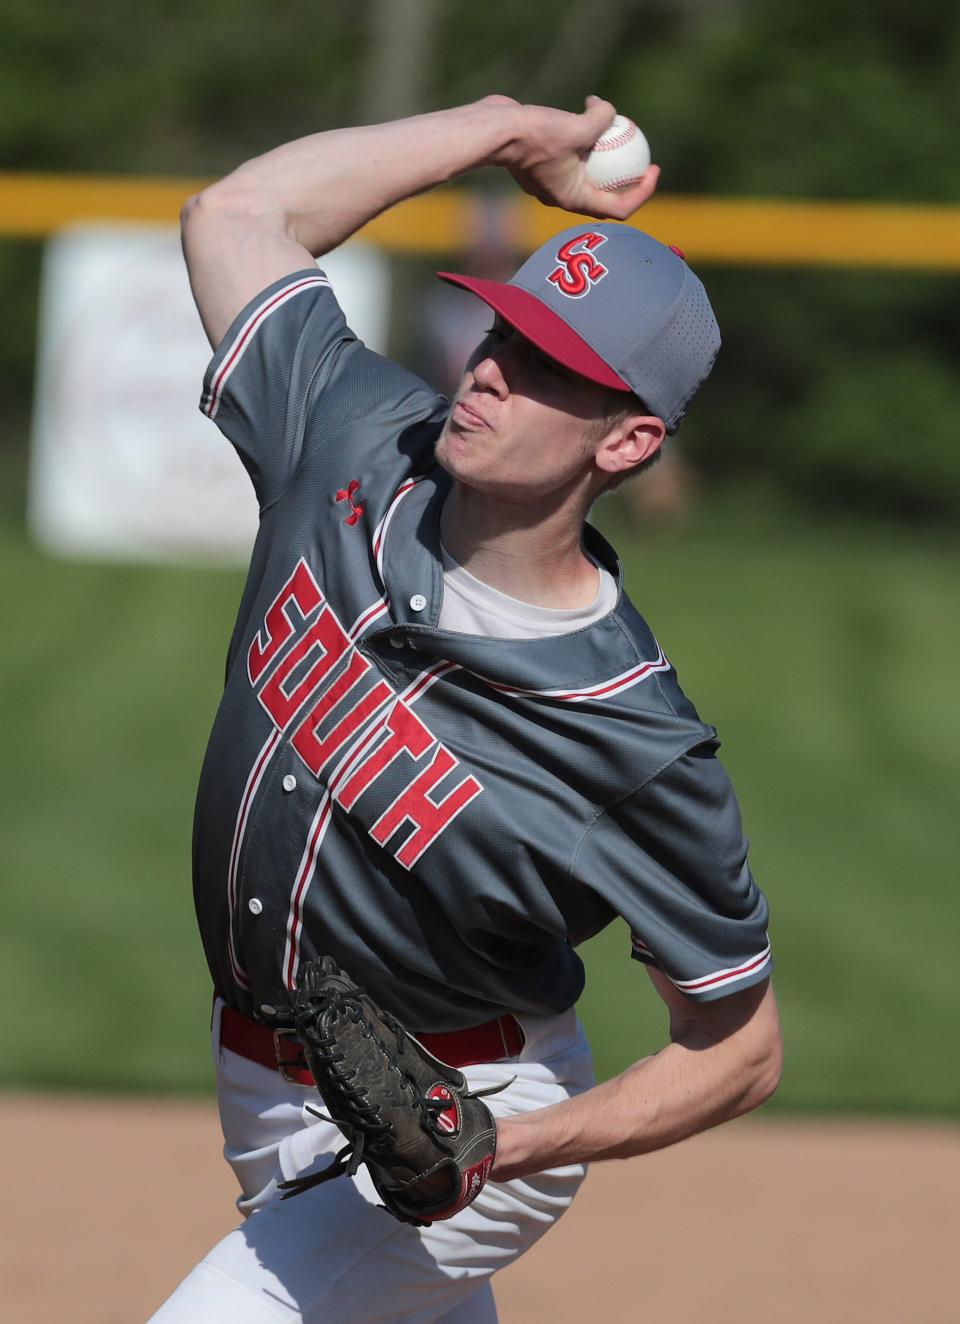 Canton South's Brady Noll delivers at pitch against Canton Central Catholic at Canton South Tuesday, May10, 2022.